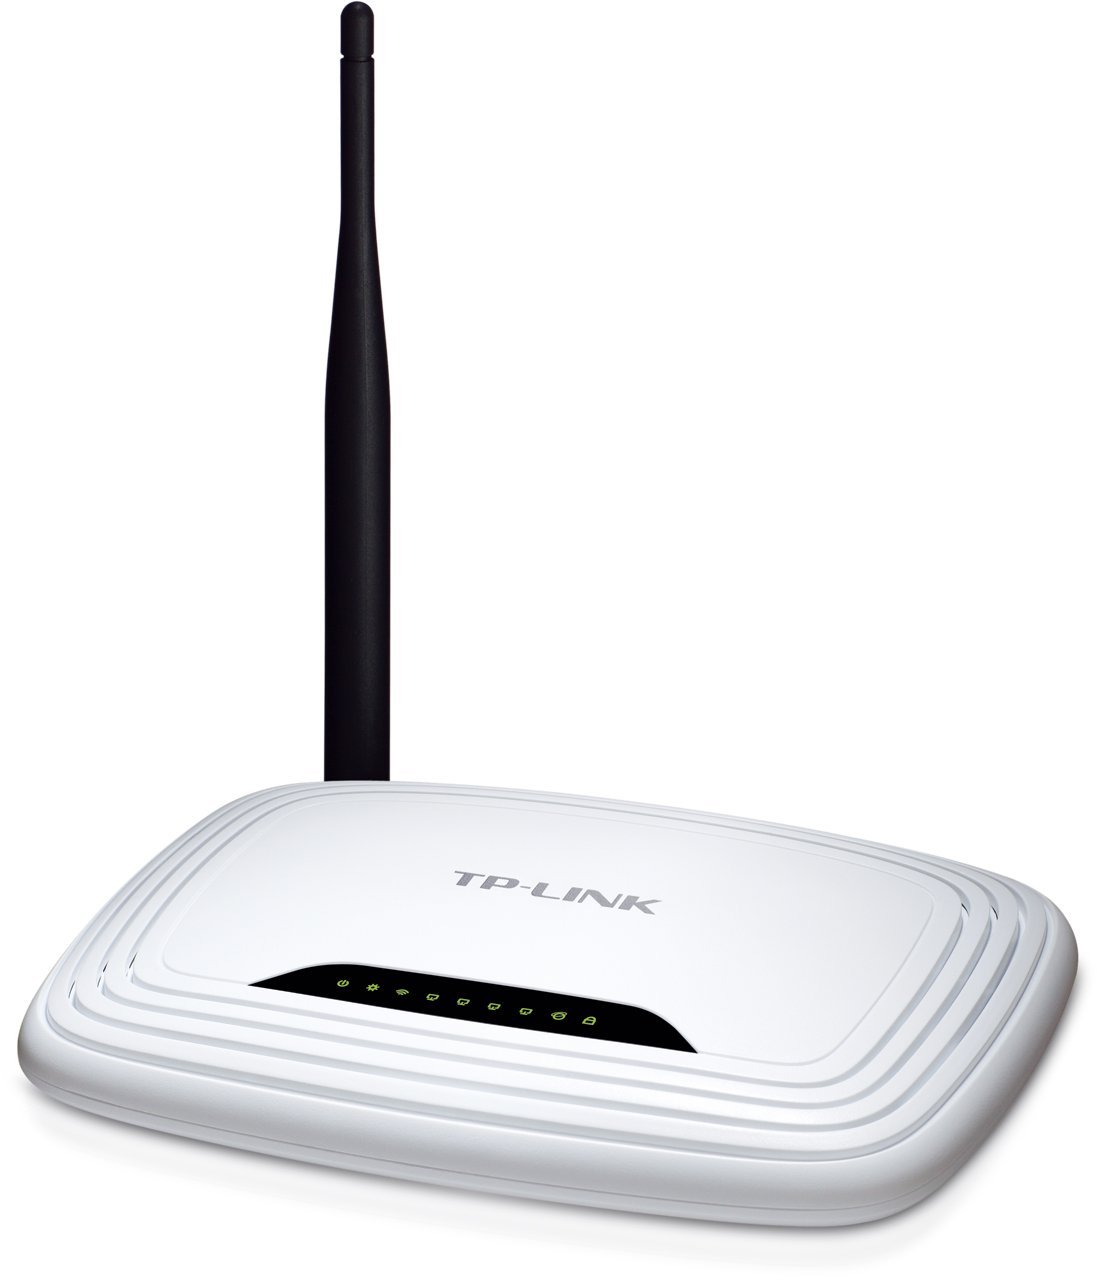 Buy TP-Link TD-W8901N Wireless Modem Router at Best Price on